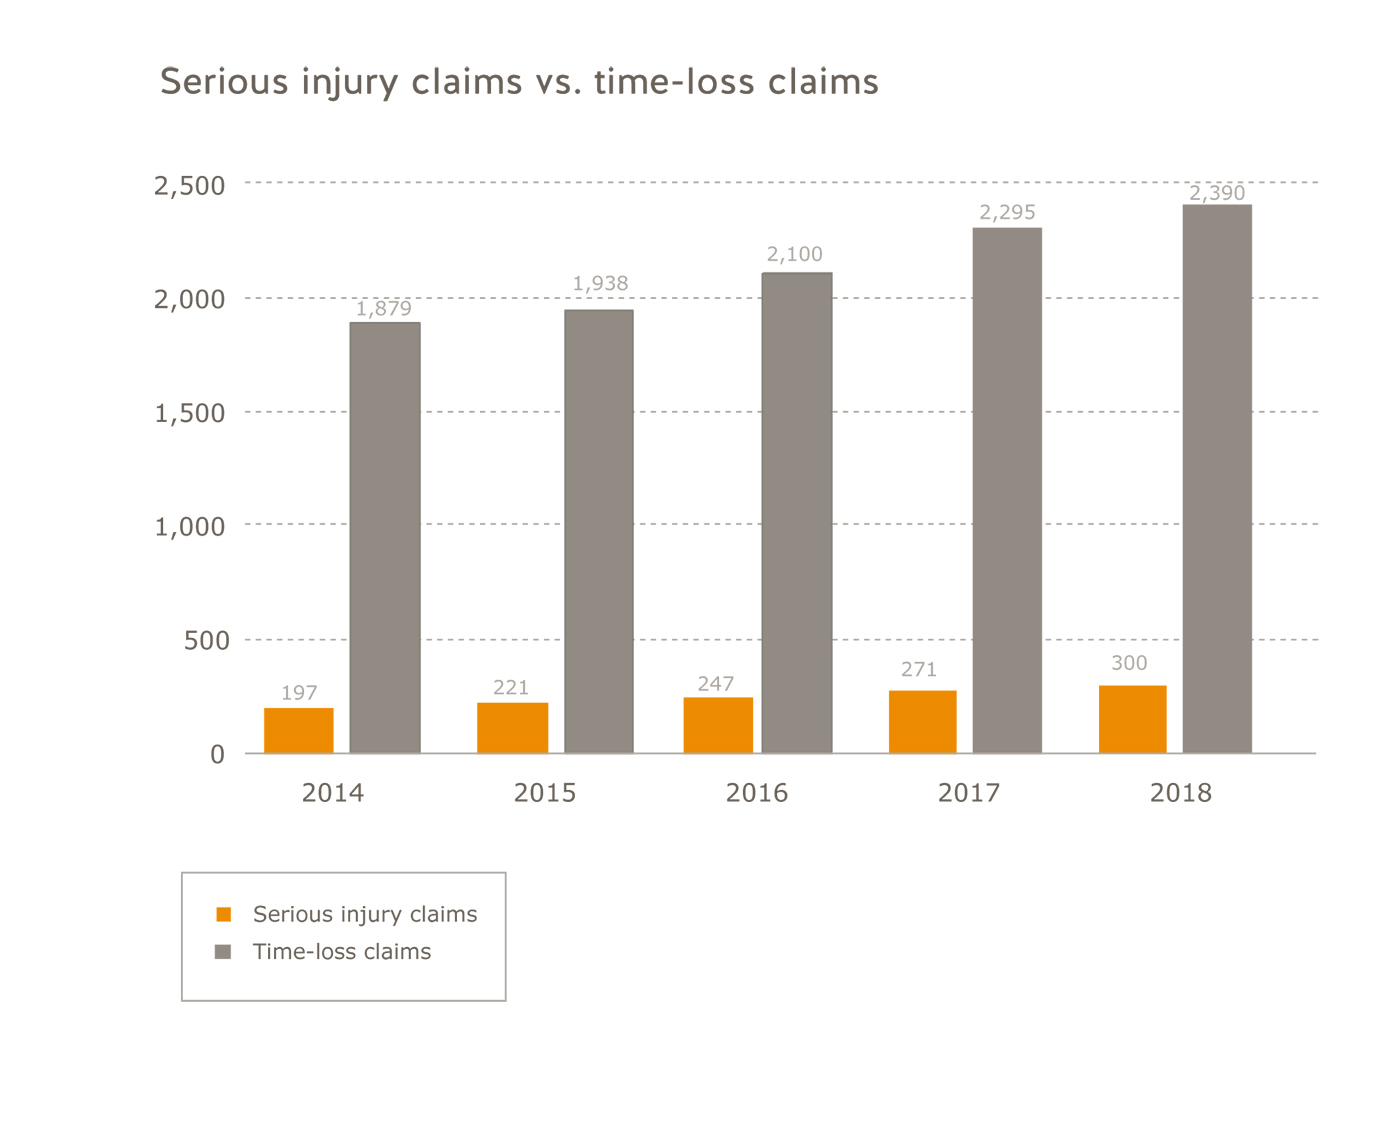 Education sector serious injury claims vs. time-loss claims for 2014 to 2018. Serious injury claims: 2014=197; 2015=221; 2016=247; 2017=271; 2018=300. Time-loss claims: 2014=1,879; 2015=1,938; 2016=2,100; 2017=2,295; 2018=2,390.